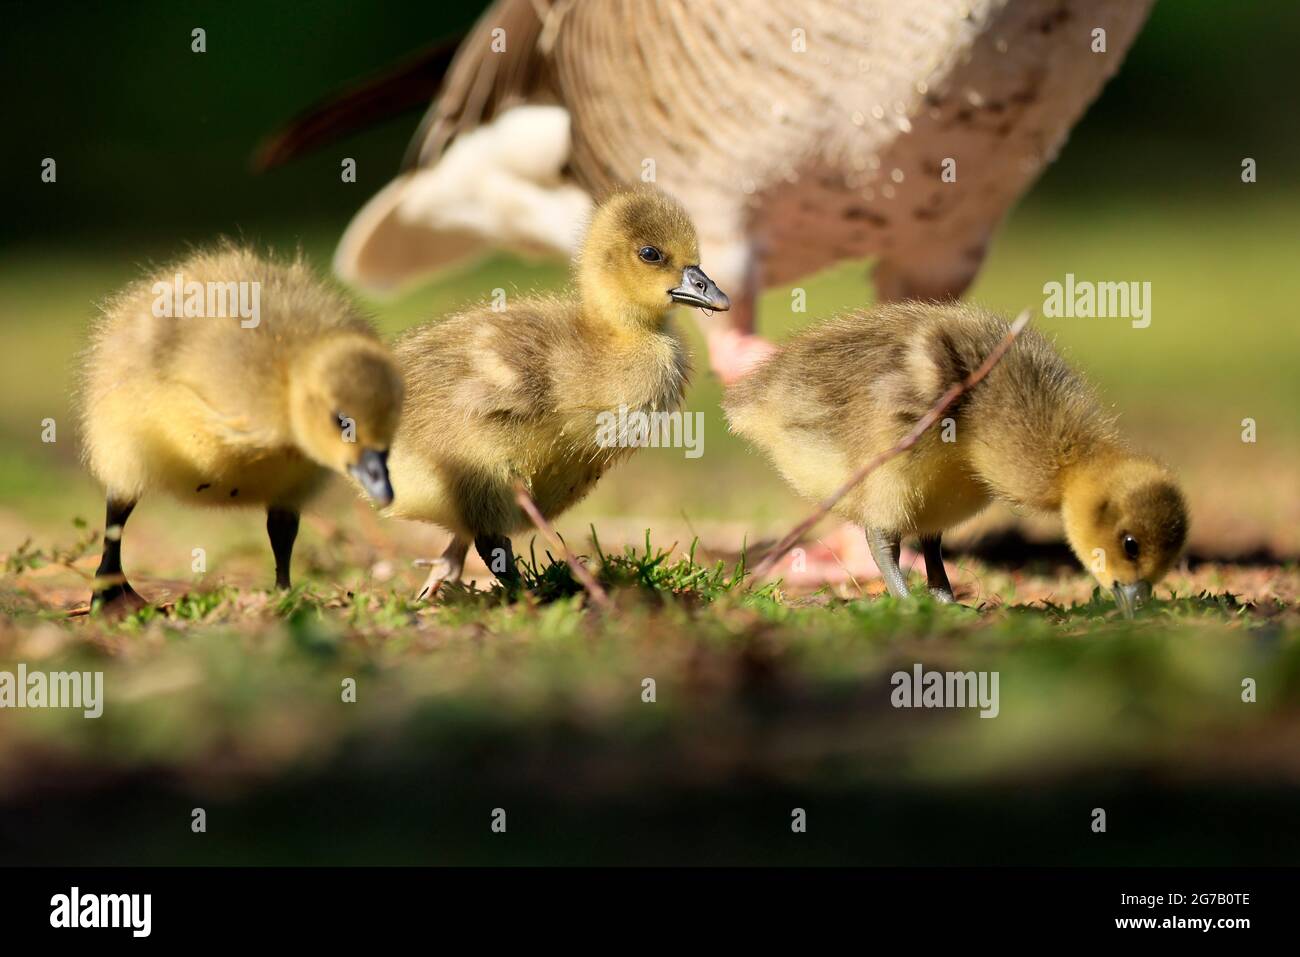 Greylag goose (Anser anser) chick in a meadow, Germany Stock Photo